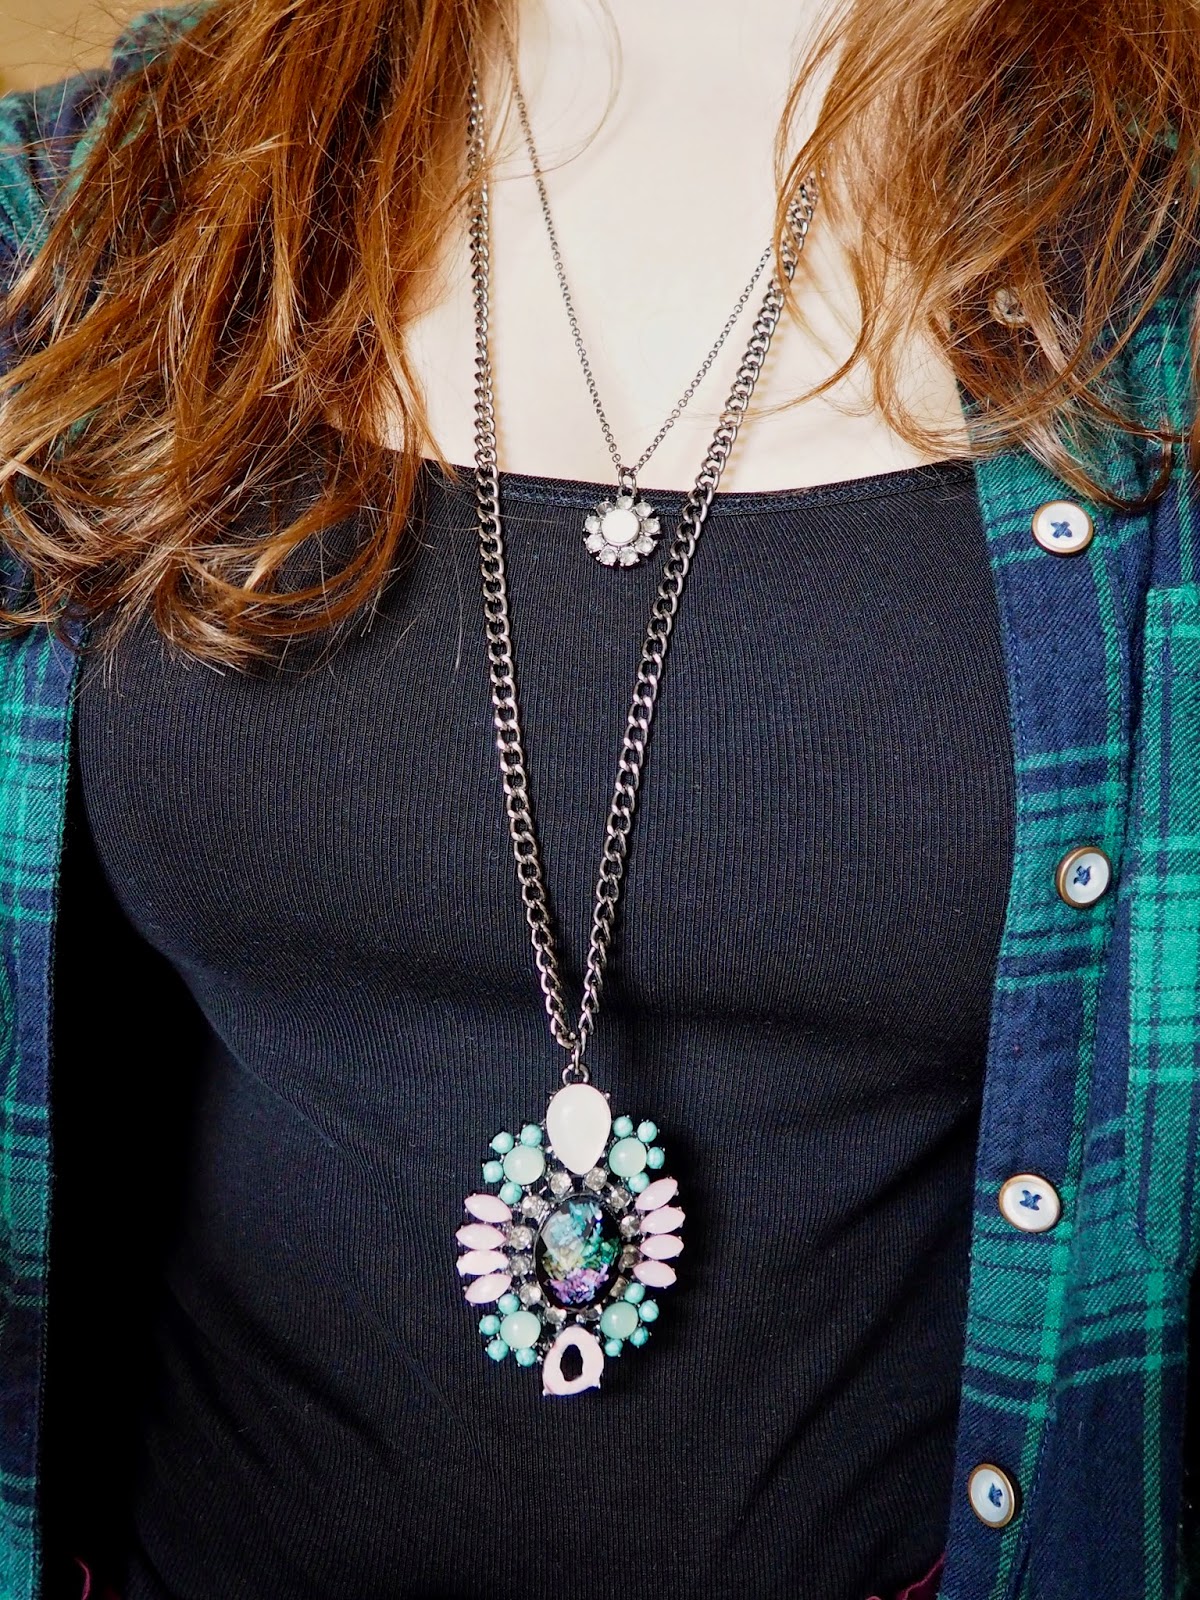 Statement Pieces outfit jewellery details | chunky layered flower shaped necklaces, with green, blue and pink jewels and stones